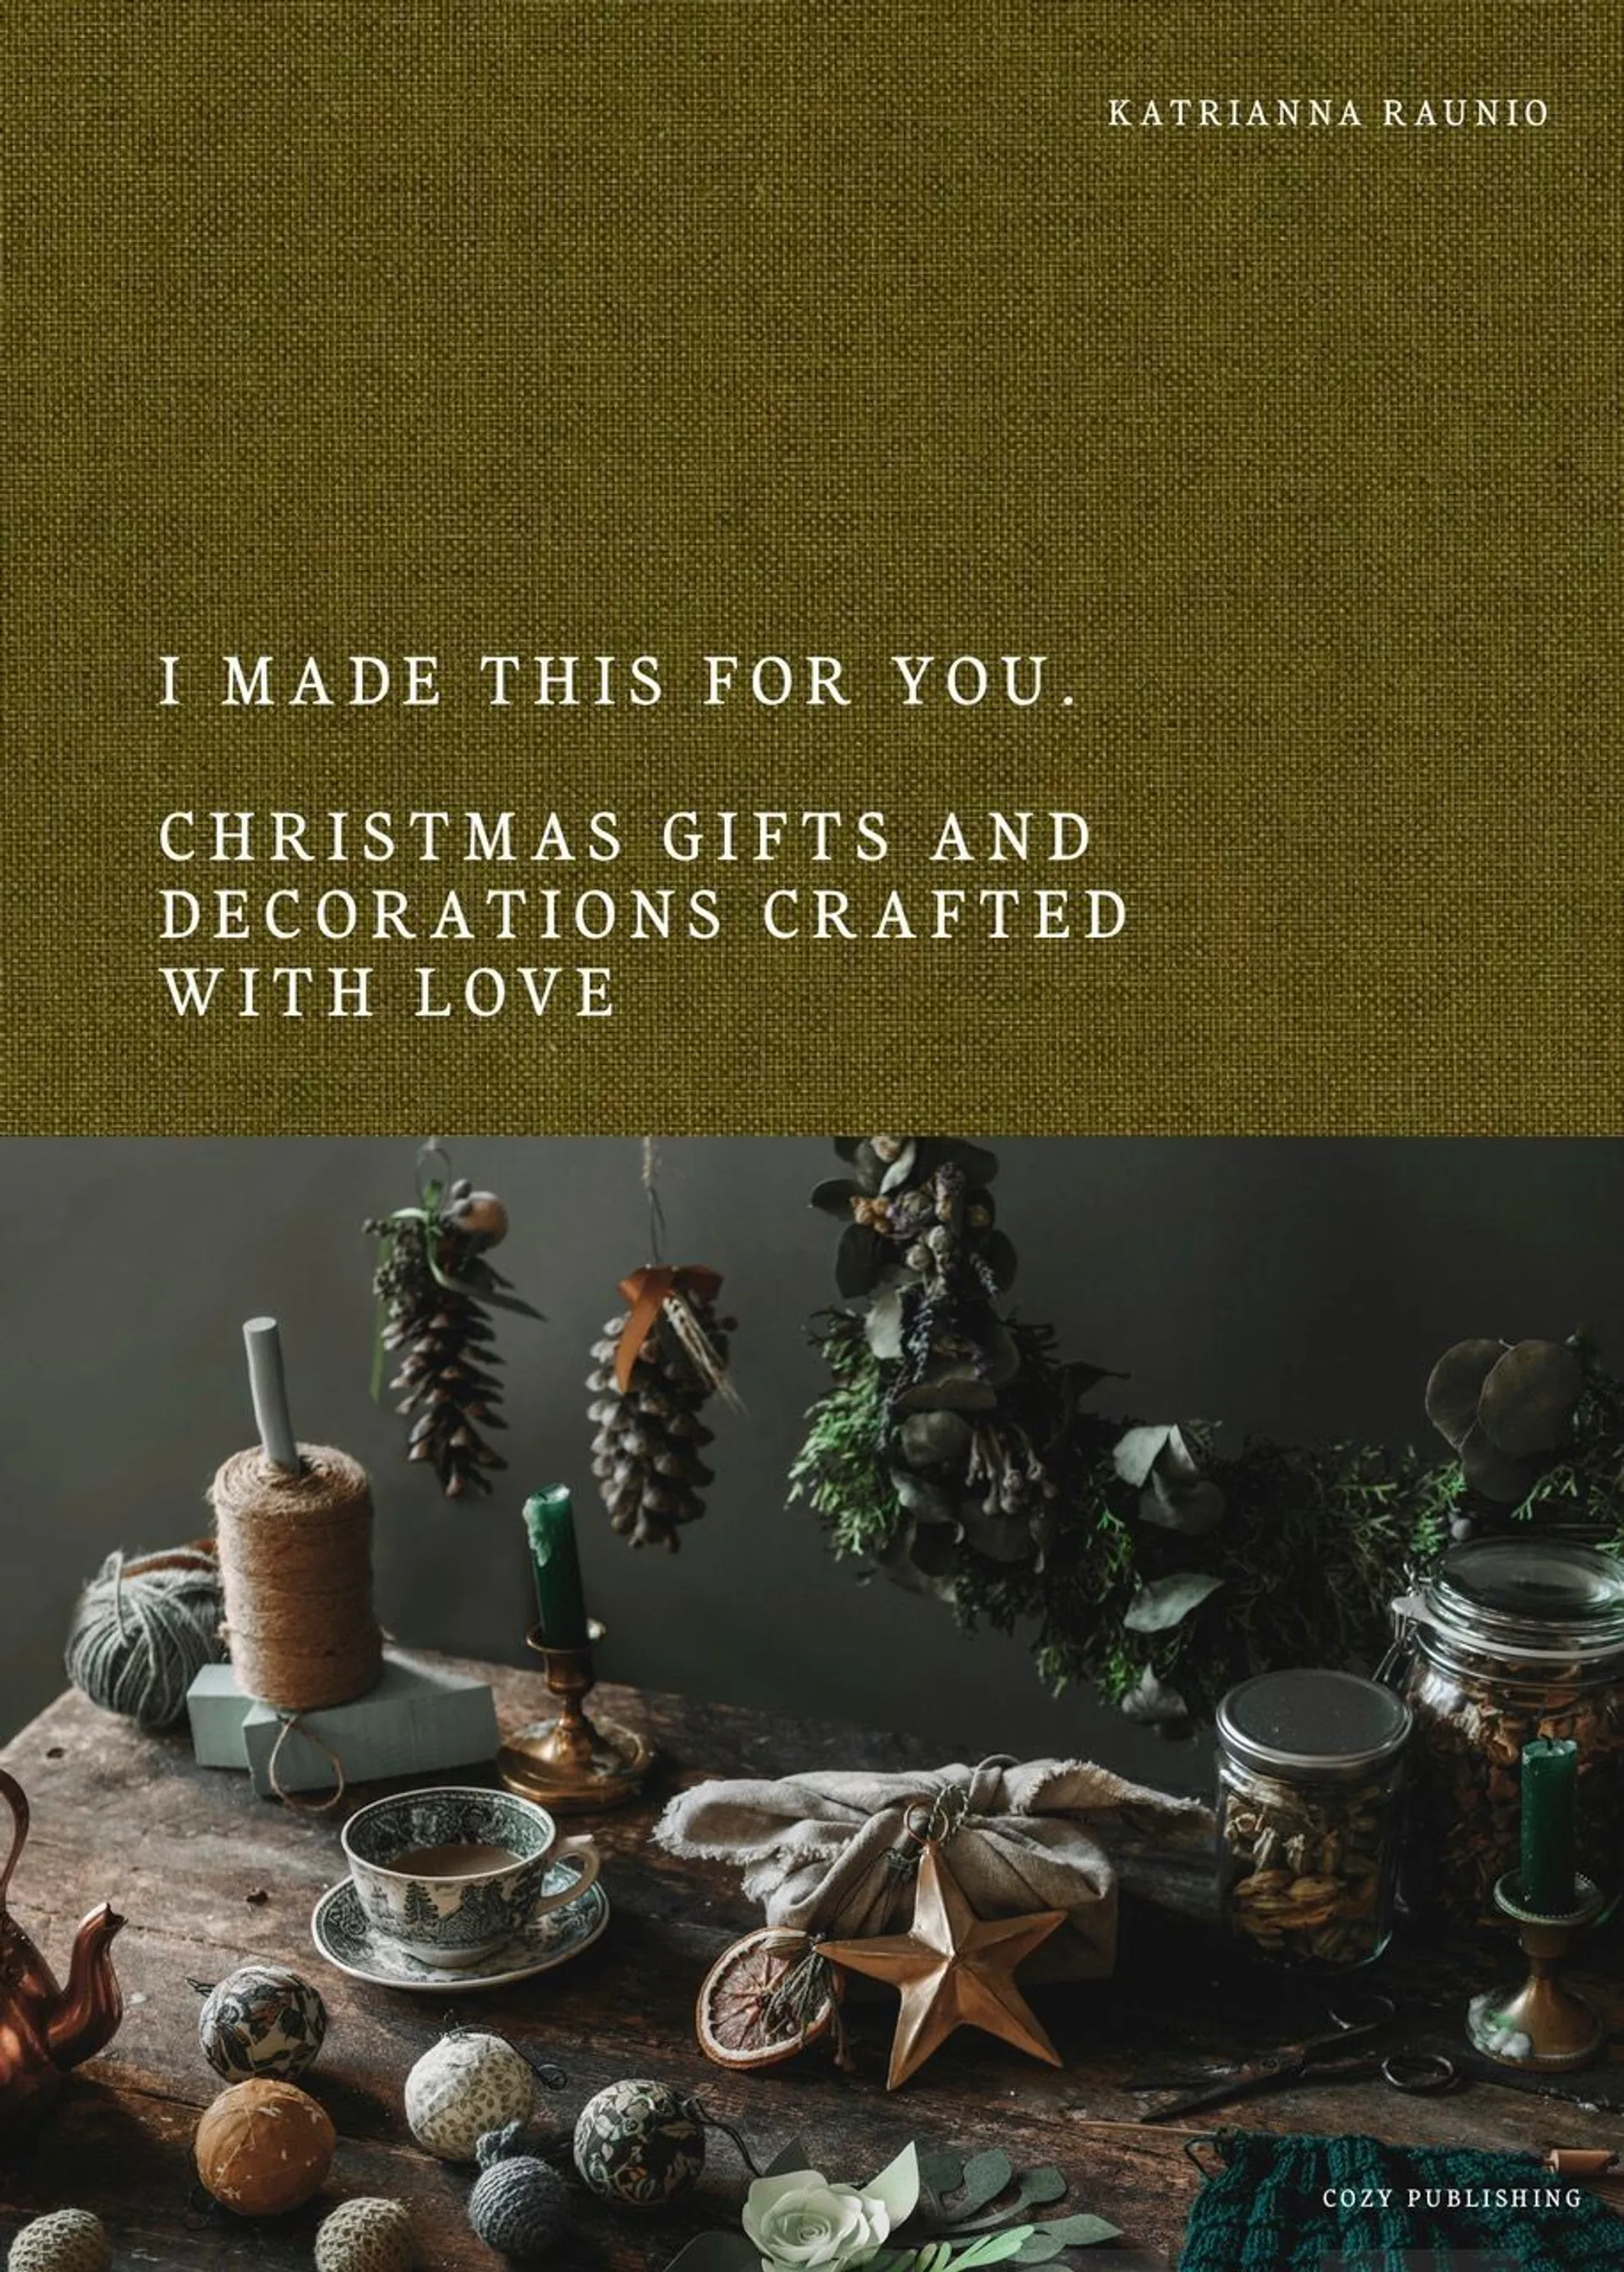 Katrianna Raunio, I Made This For You - Christmas Gift and Decorations Crafted with Love